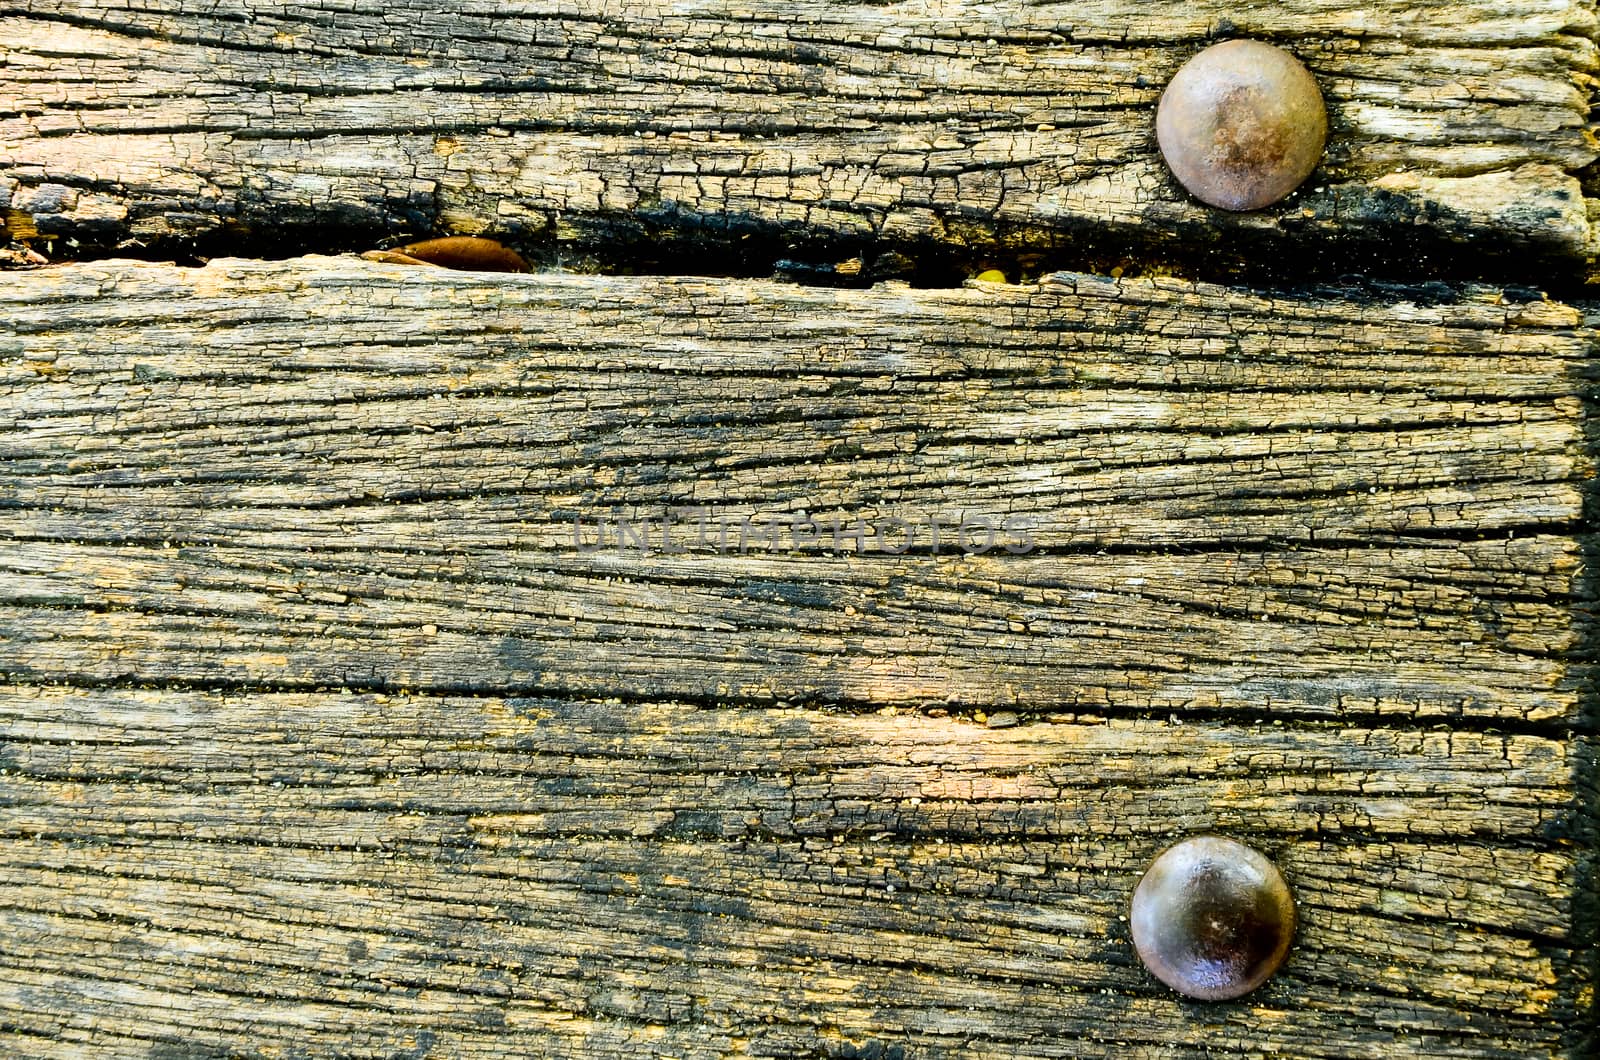 old wooden surface.